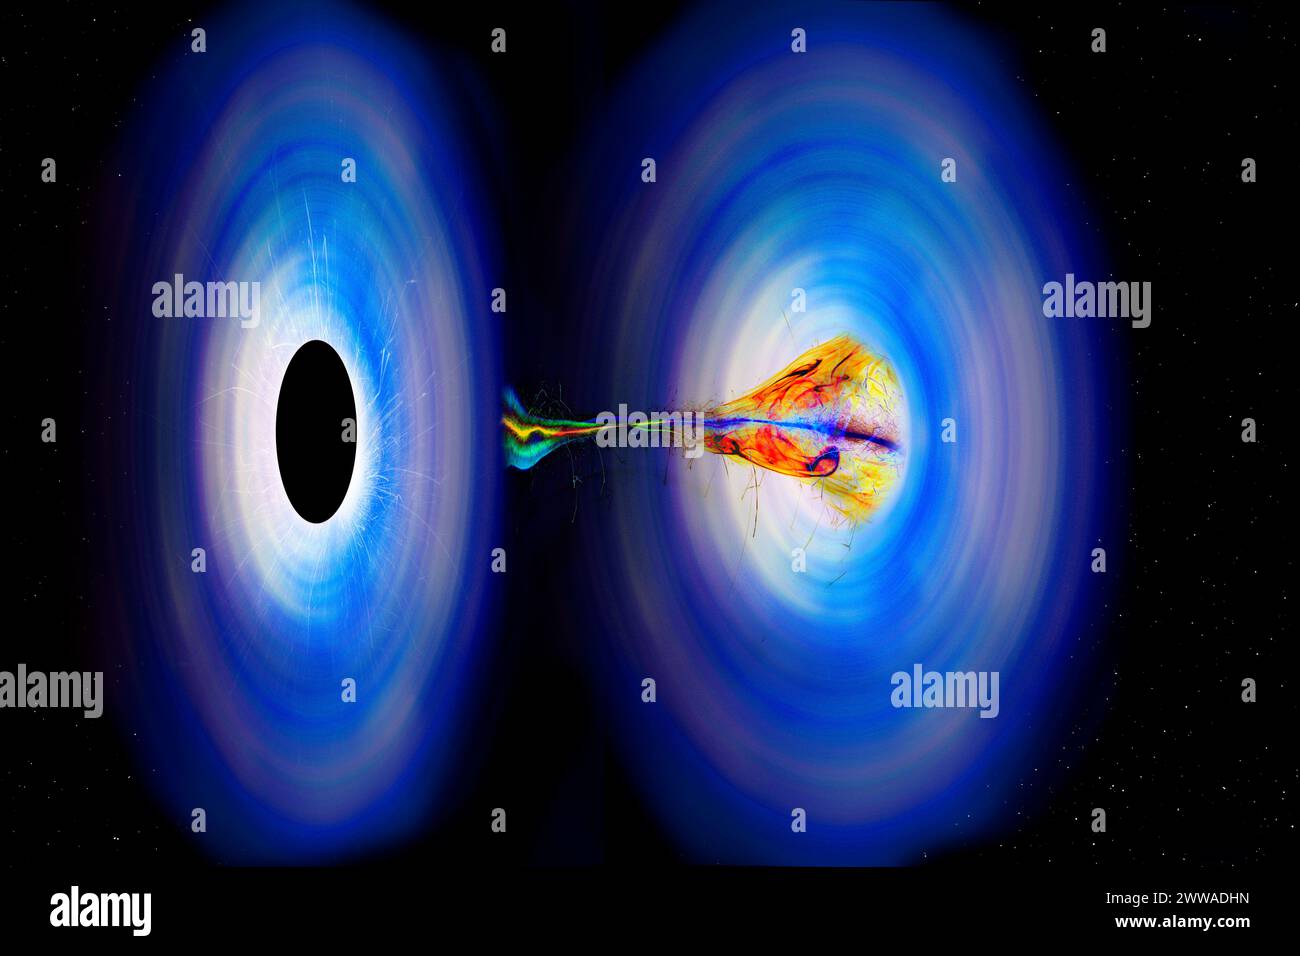 Conceptual illustration depicting matter transitioning from a black hole to a white hole. Stock Photo